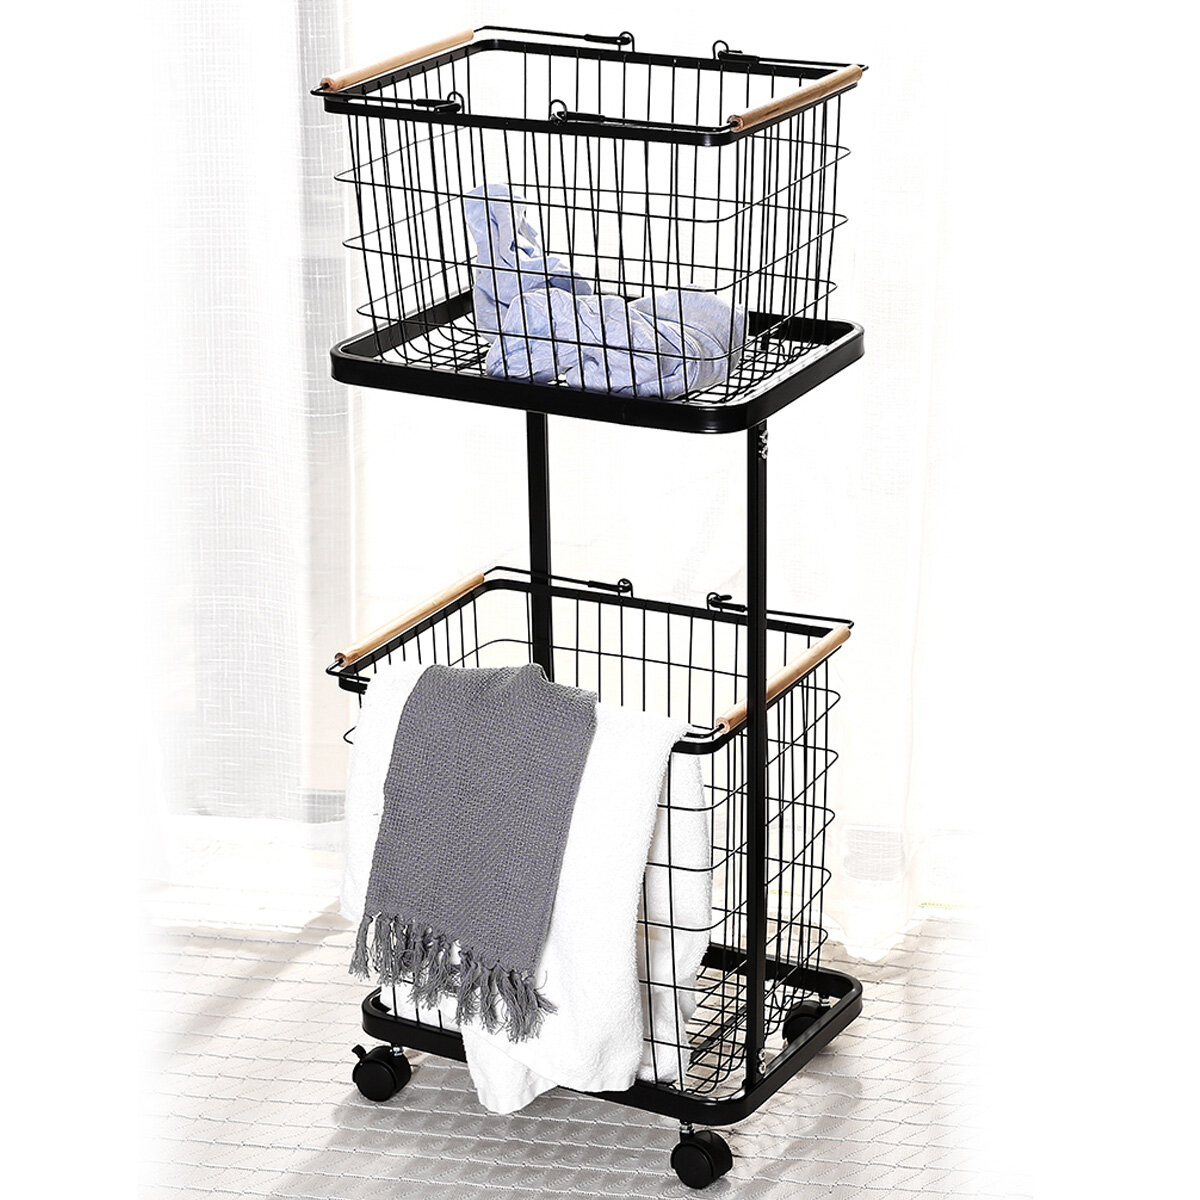 2 Tiers Laundry Basket Cart Household Clothes Storage Organizer Movable Layered Rack Storage Shelf